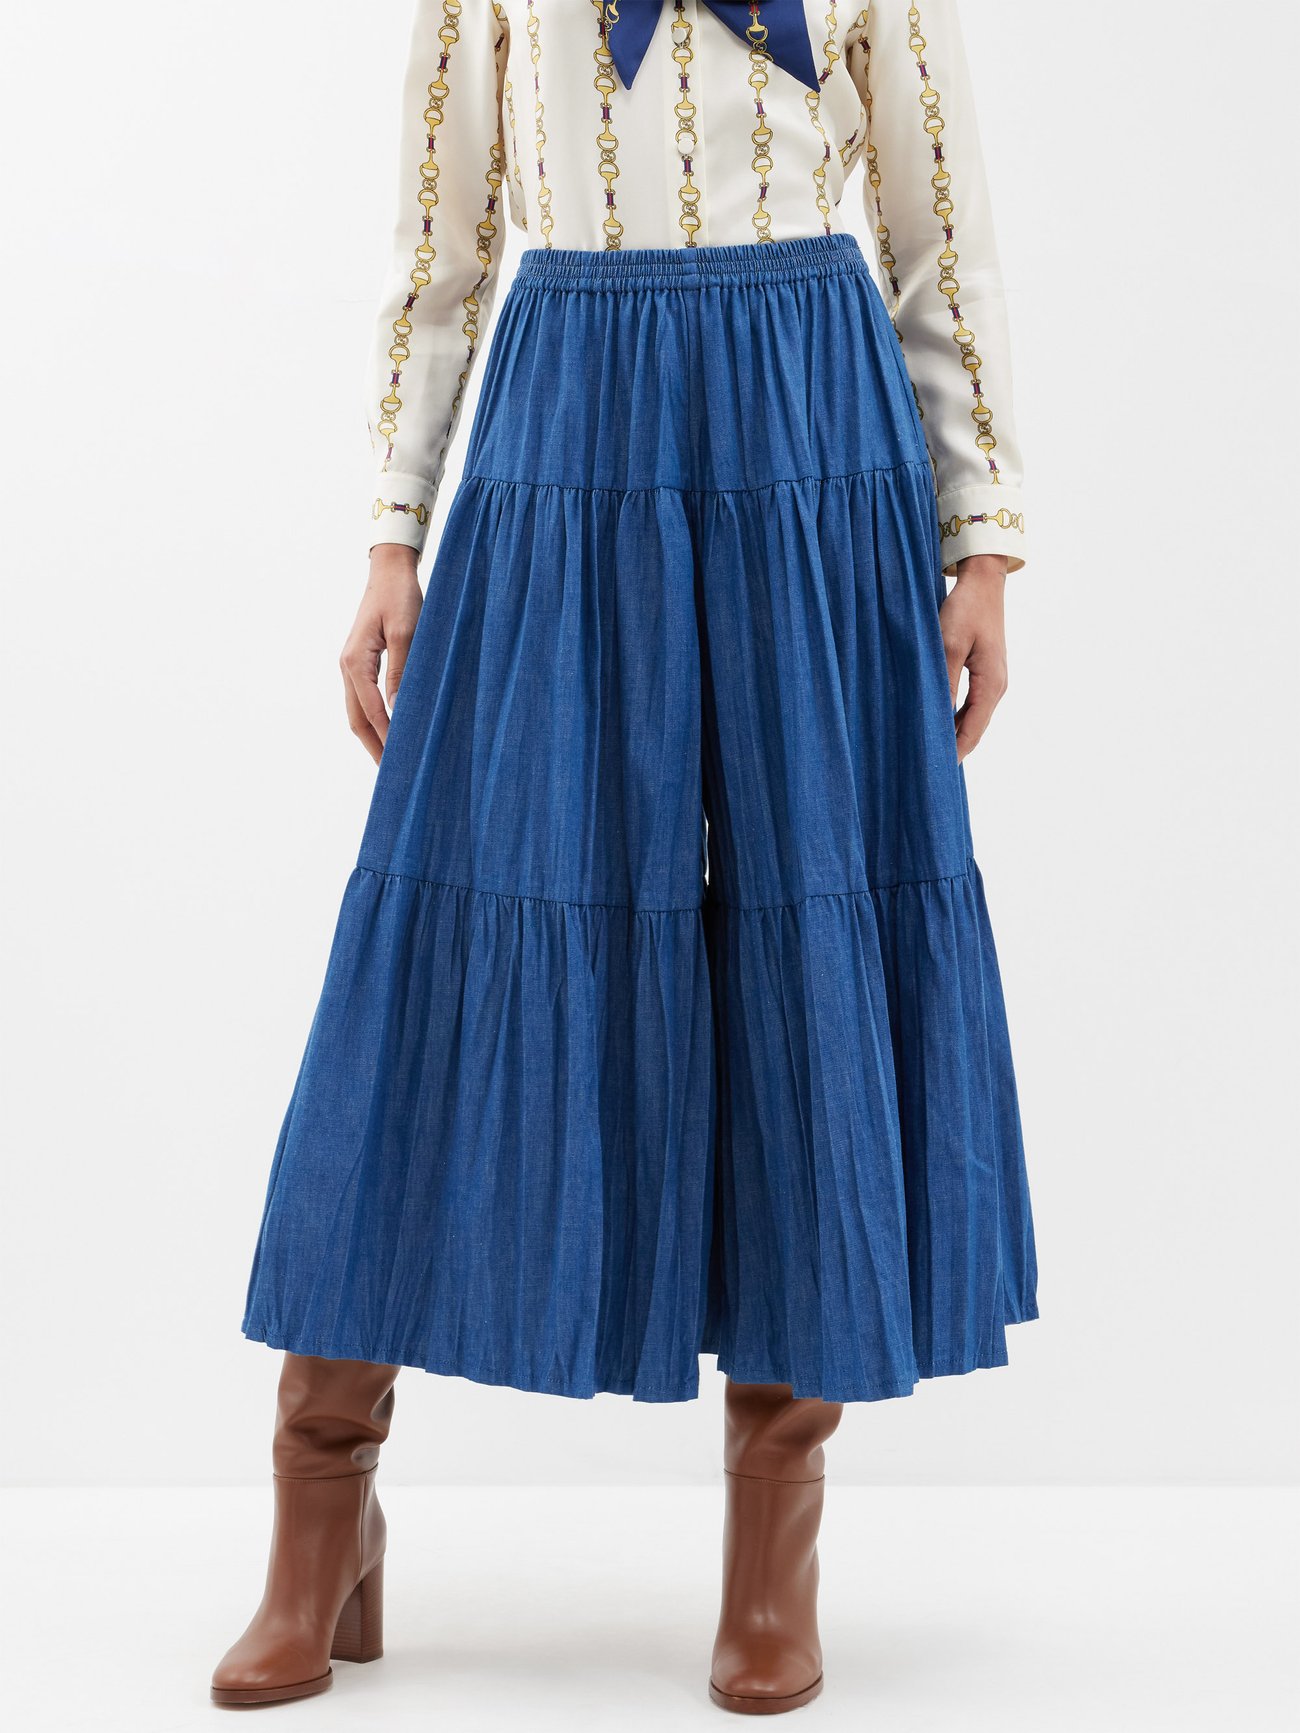 Gucci's blue banded skirt is made from washed cotton denim with banded panels, accented with gold logo-embossed buttons down one side.